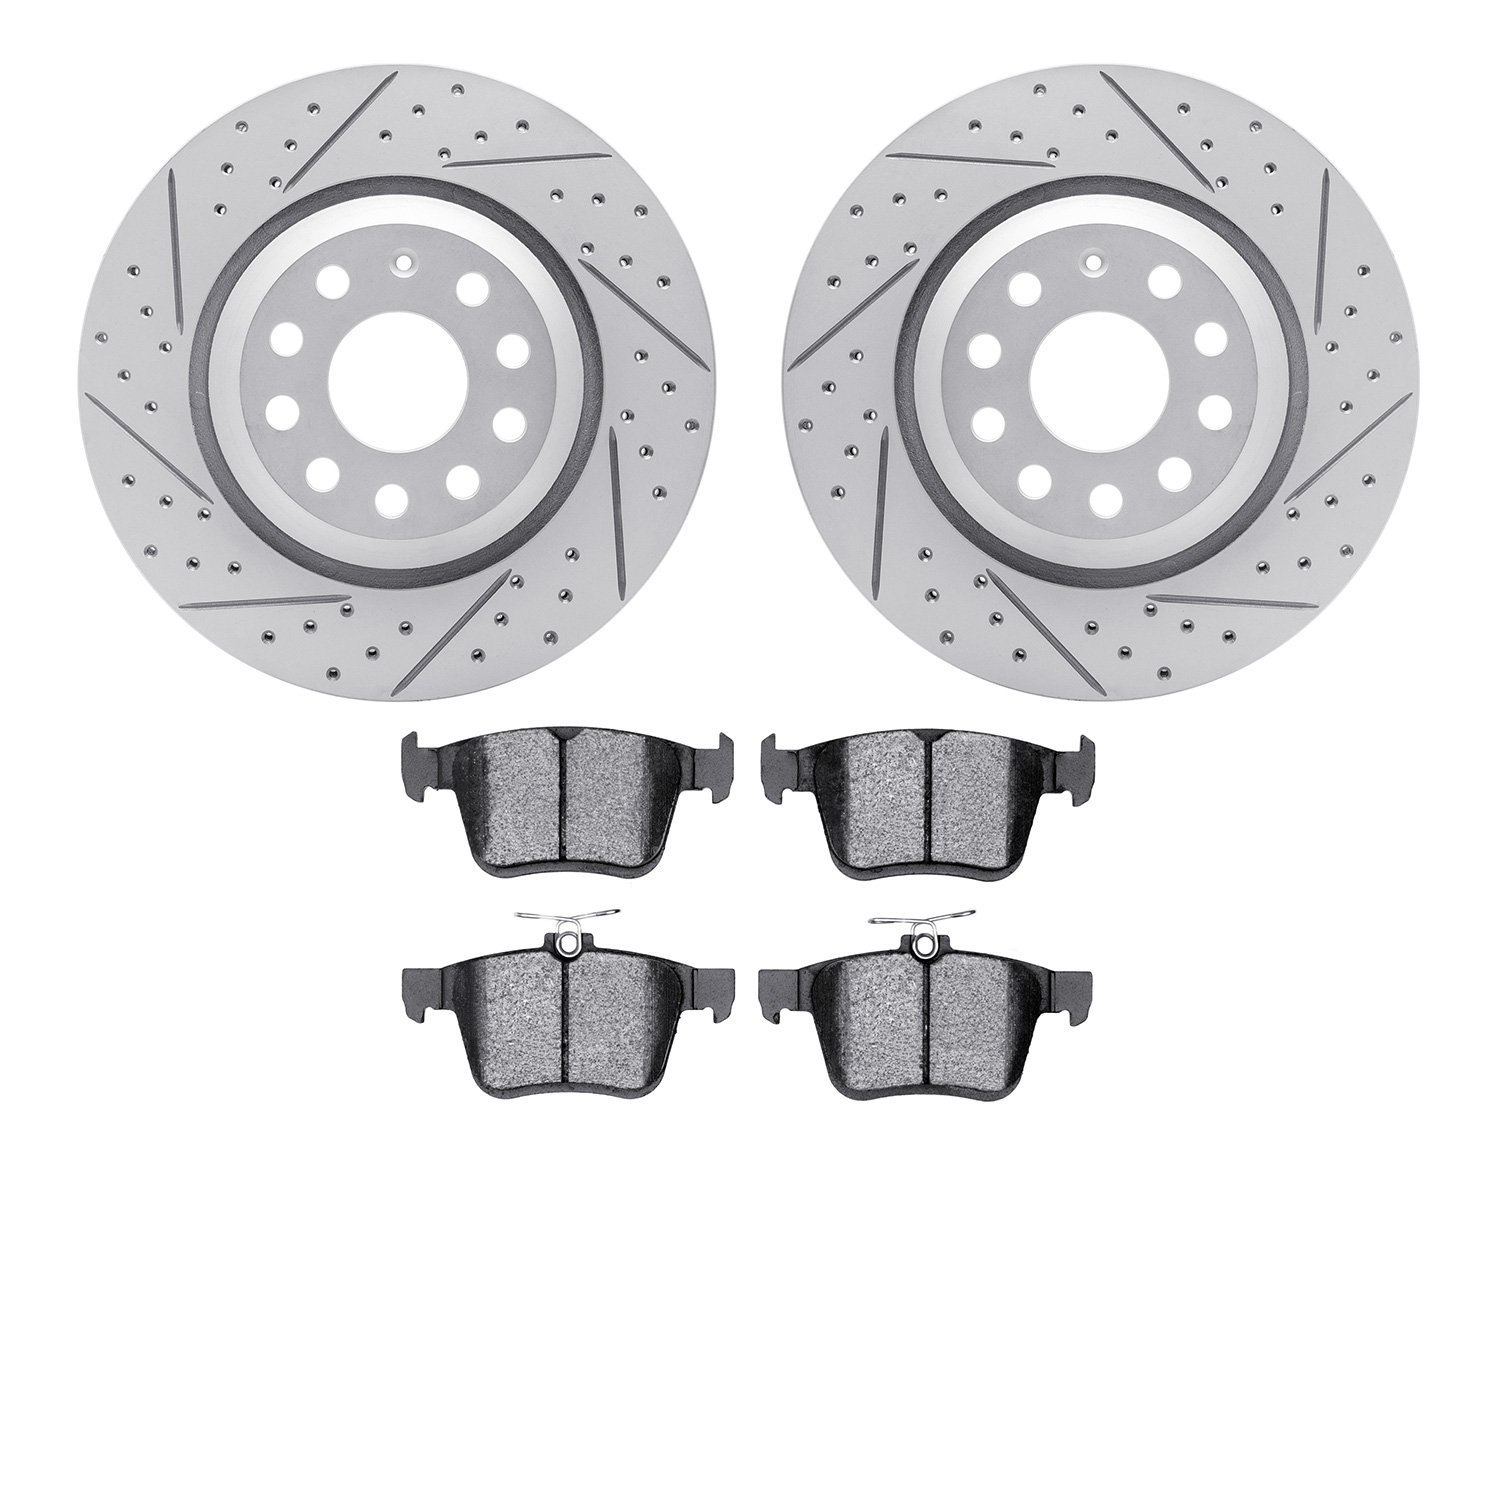 2502-74093 Geoperformance Drilled/Slotted Rotors w/5000 Advanced Brake Pads Kit, Fits Select Audi/Volkswagen, Position: Rear